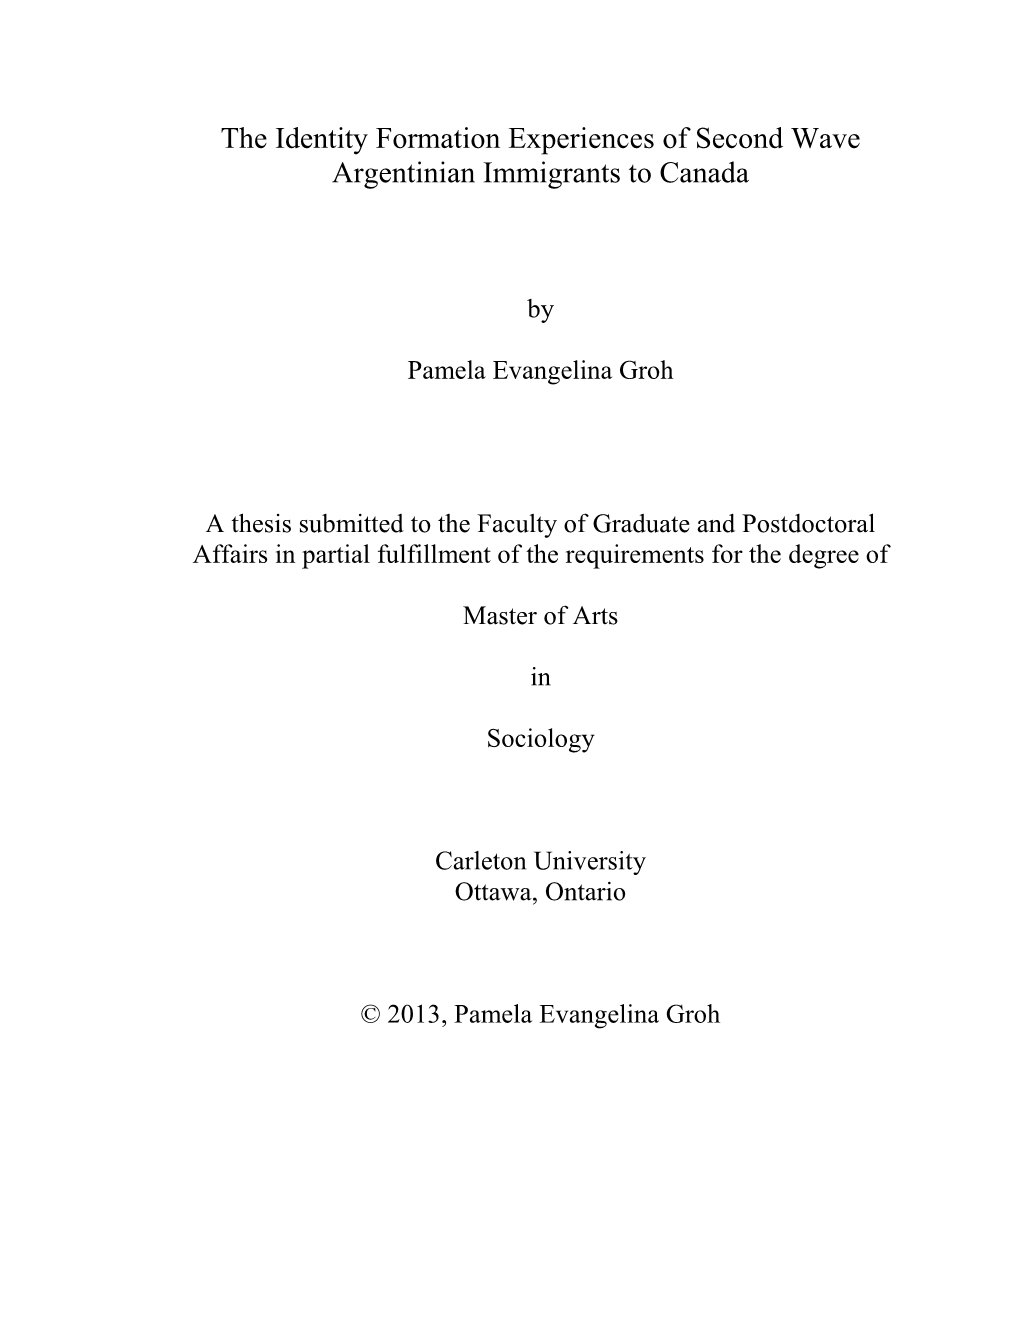 The Identity Formation Experiences of Second Wave Argentinian Immigrants to Canada